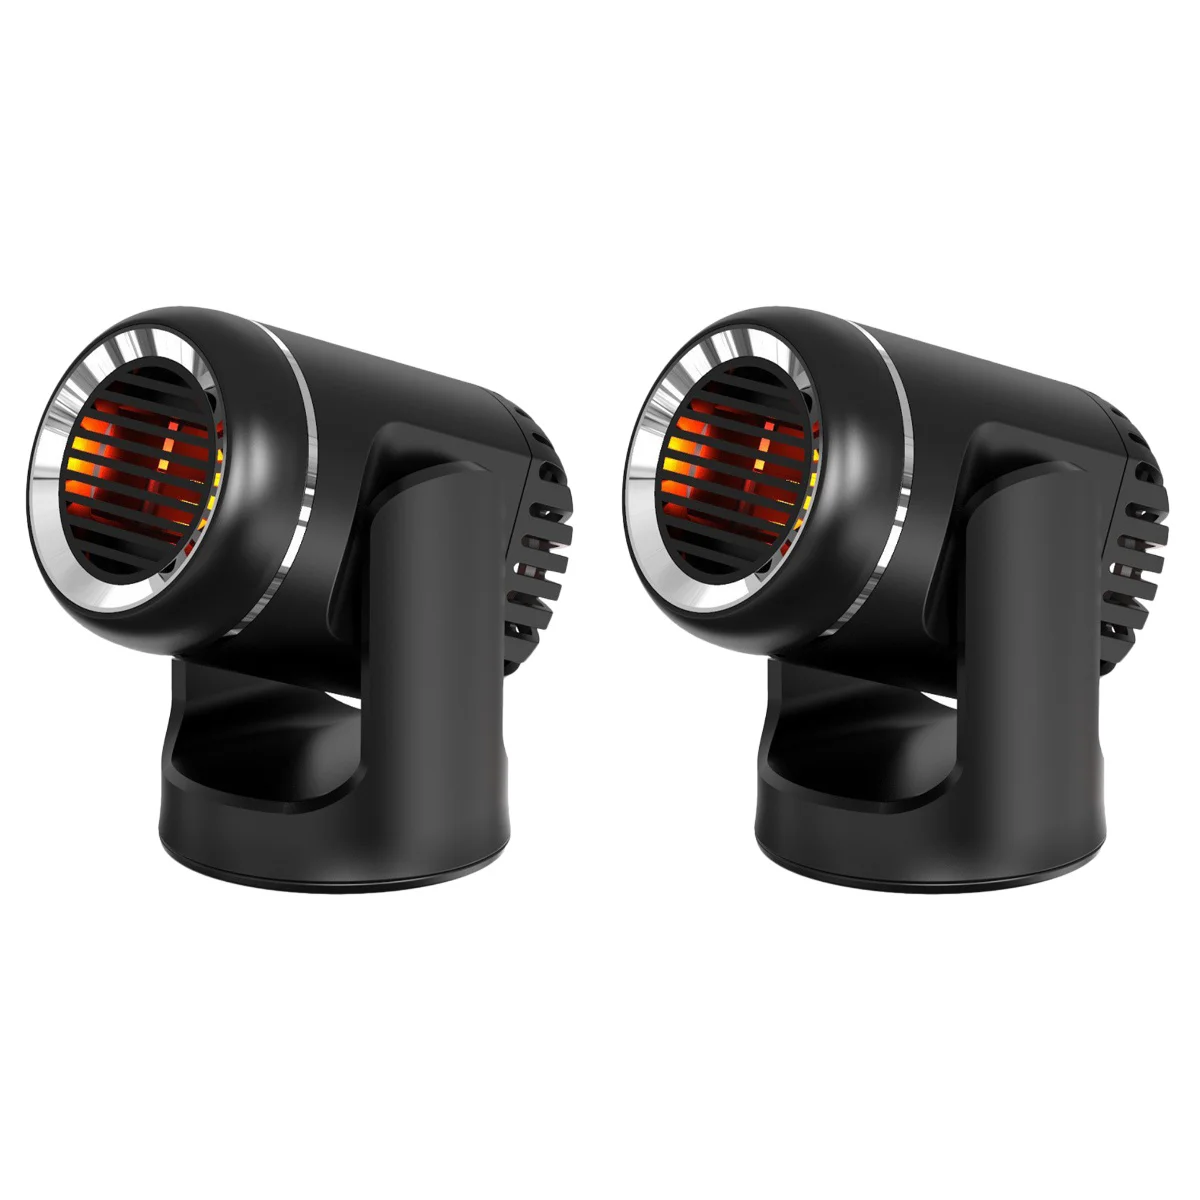 

2 Pack Heater High Powered Fan Auto Defogger Multi-functional Car Defroster Vehicle Abs